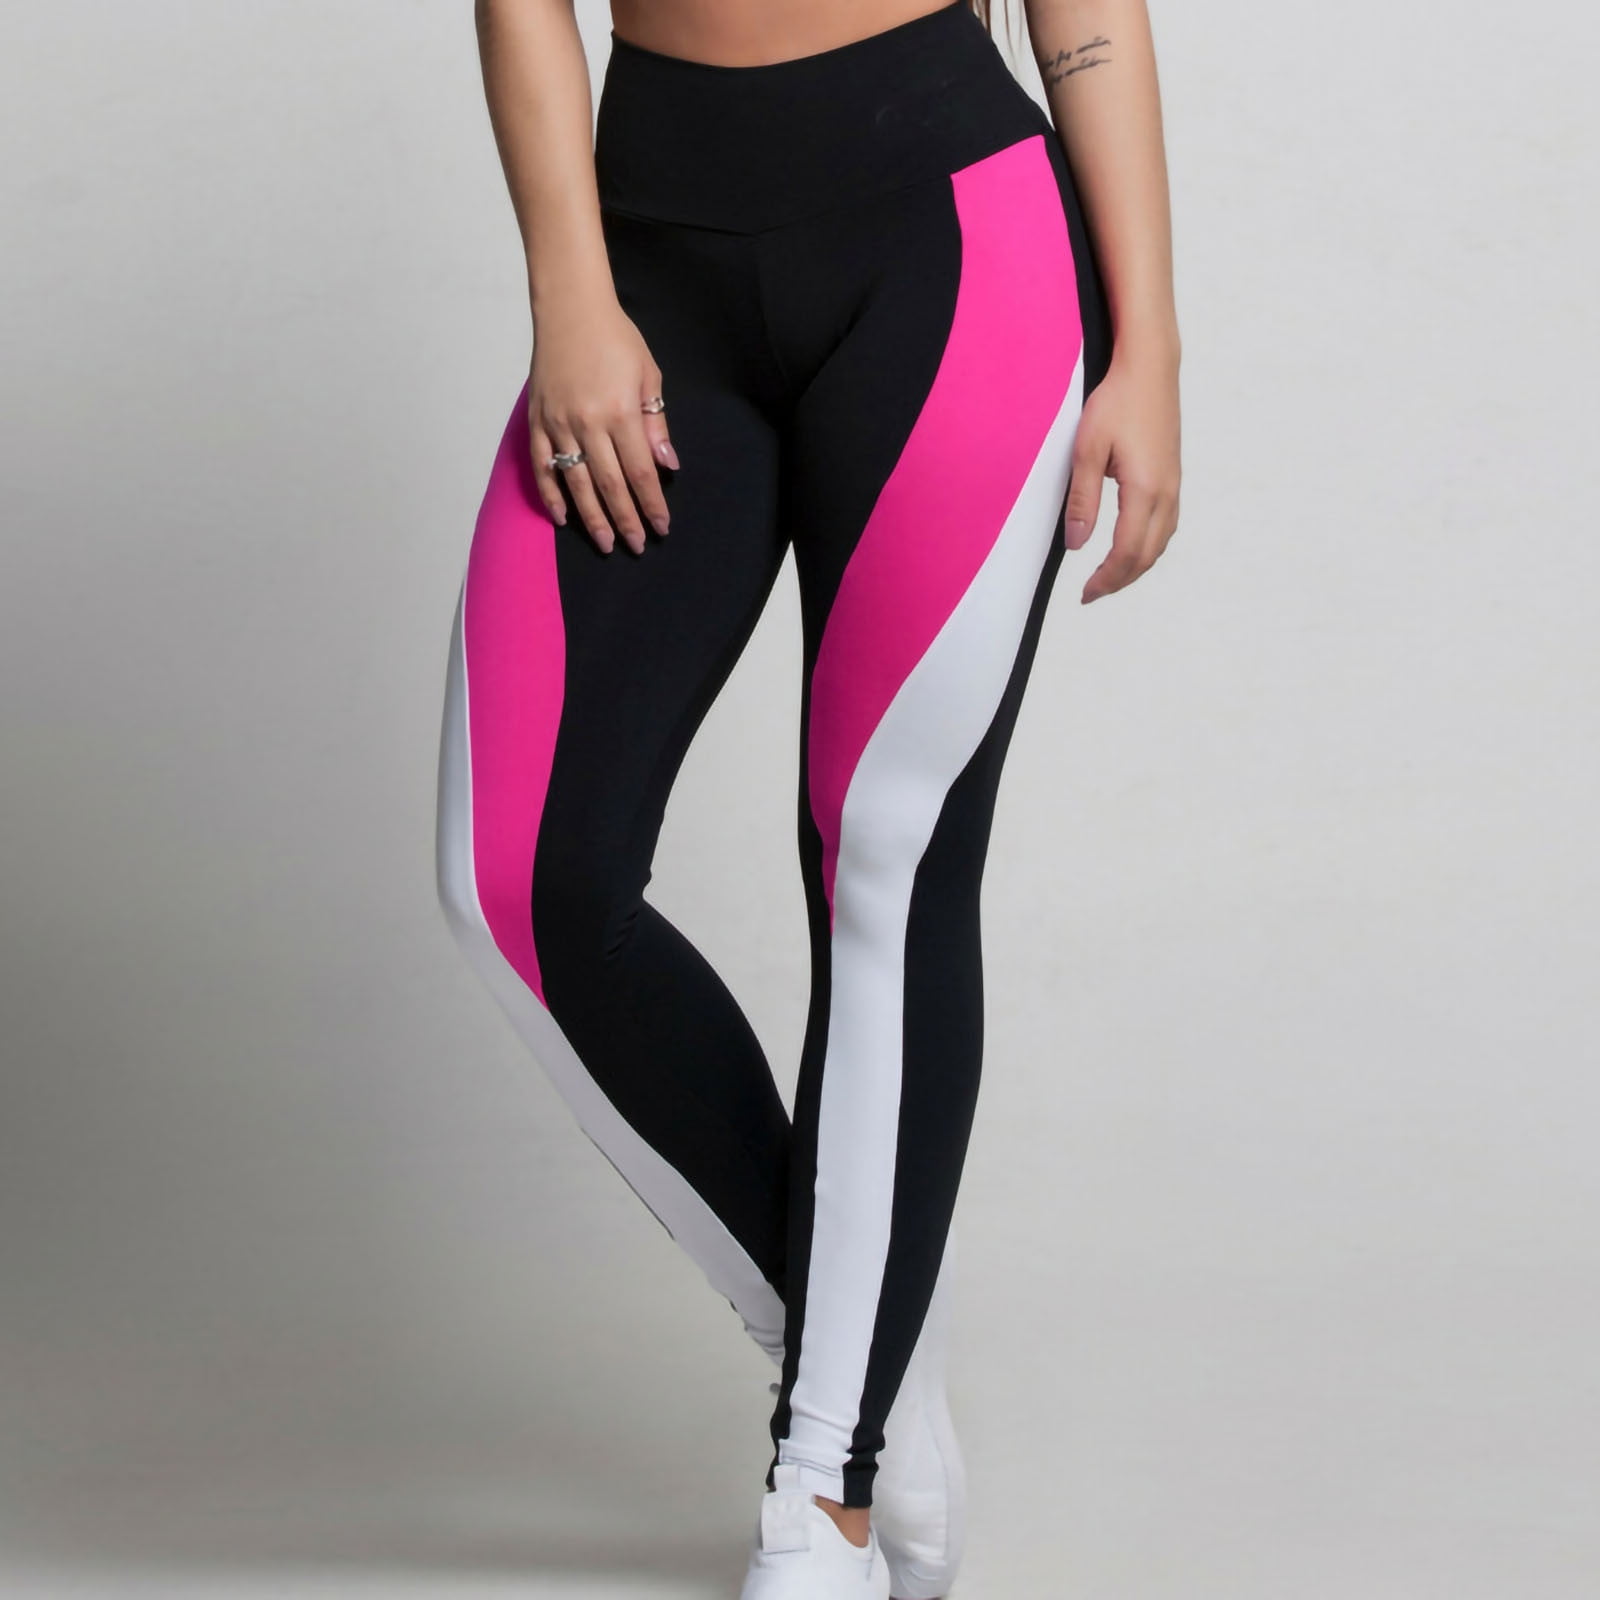 LEEy-World Workout Leggings for Women Wo Black Flare Yoga Pants, Crossover  High Waisted Casual Bootcut Leggings Hot Pink,XL 